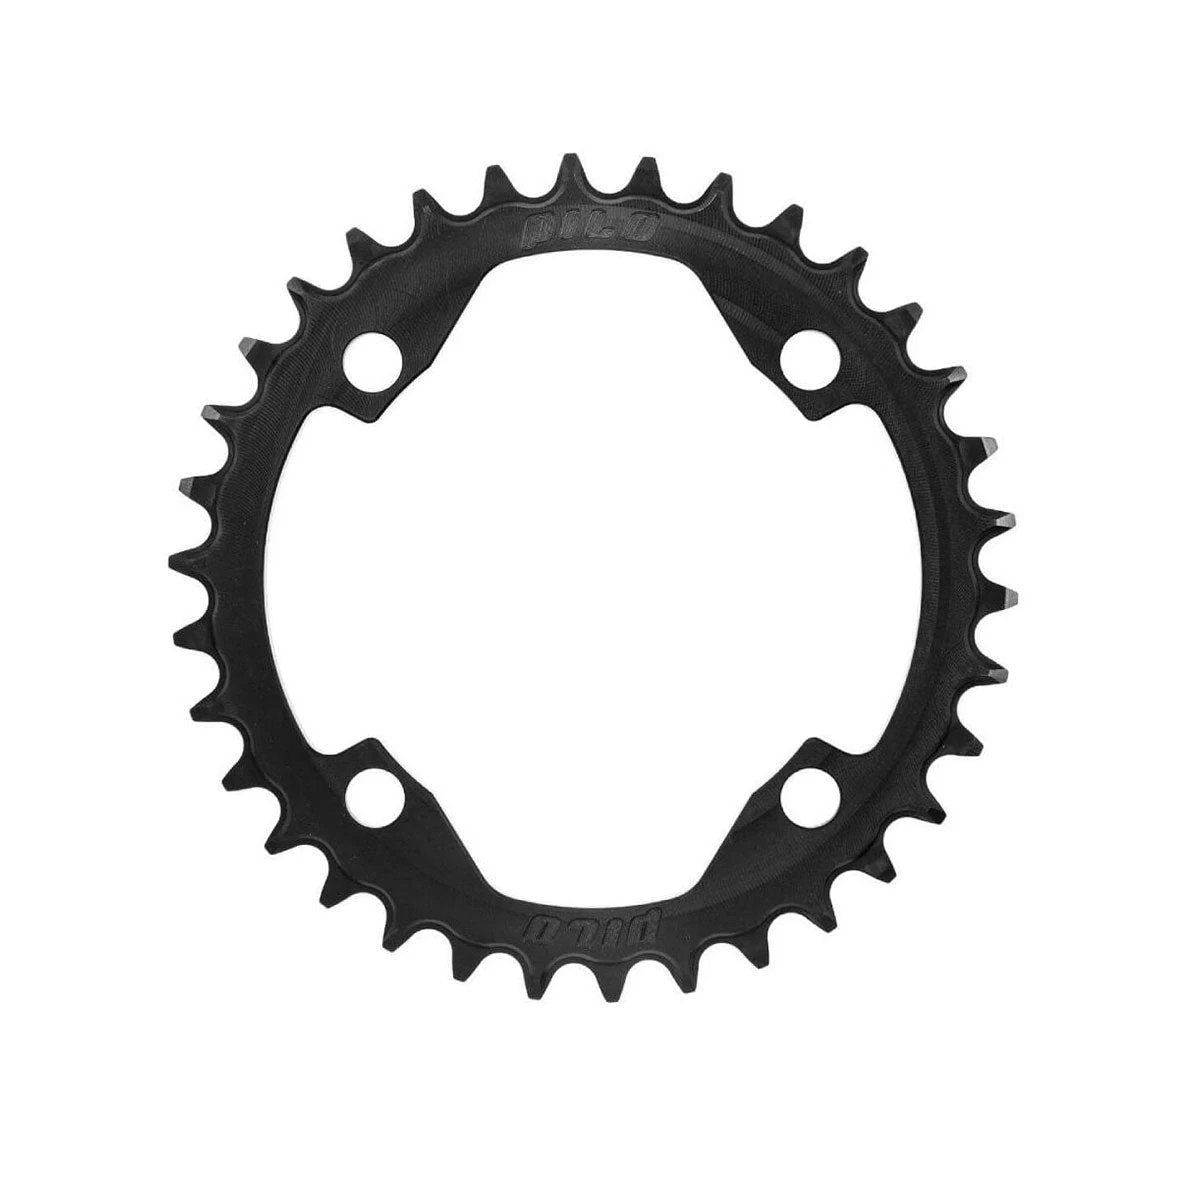 Pilo 36T 104Bcd Chainring For Hg+ Cranks